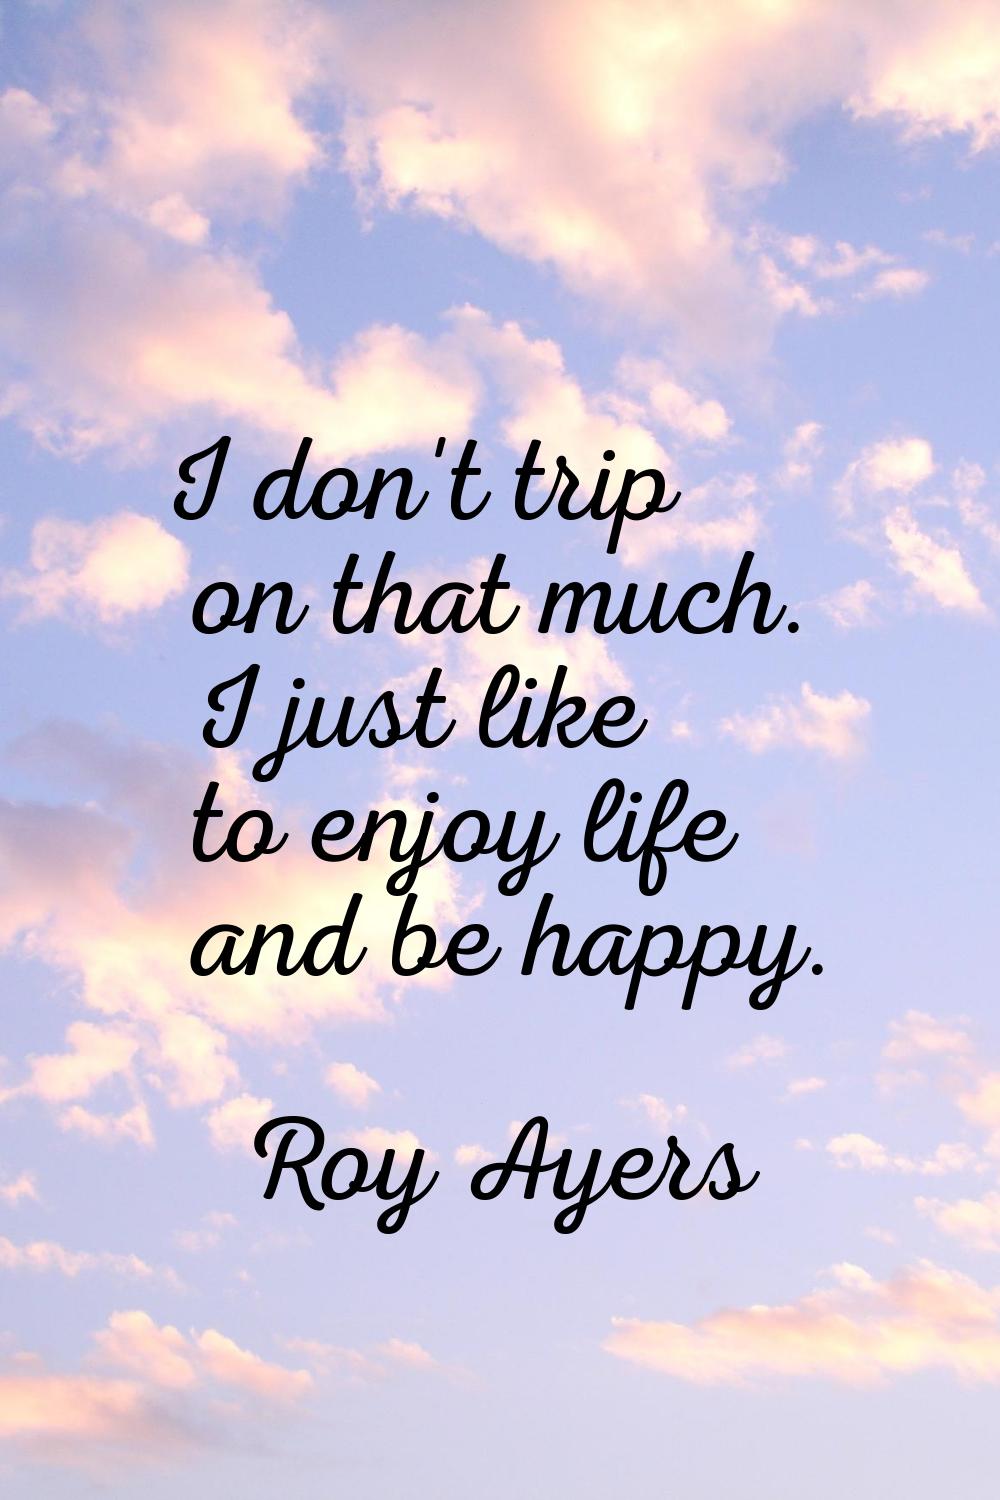 I don't trip on that much. I just like to enjoy life and be happy.